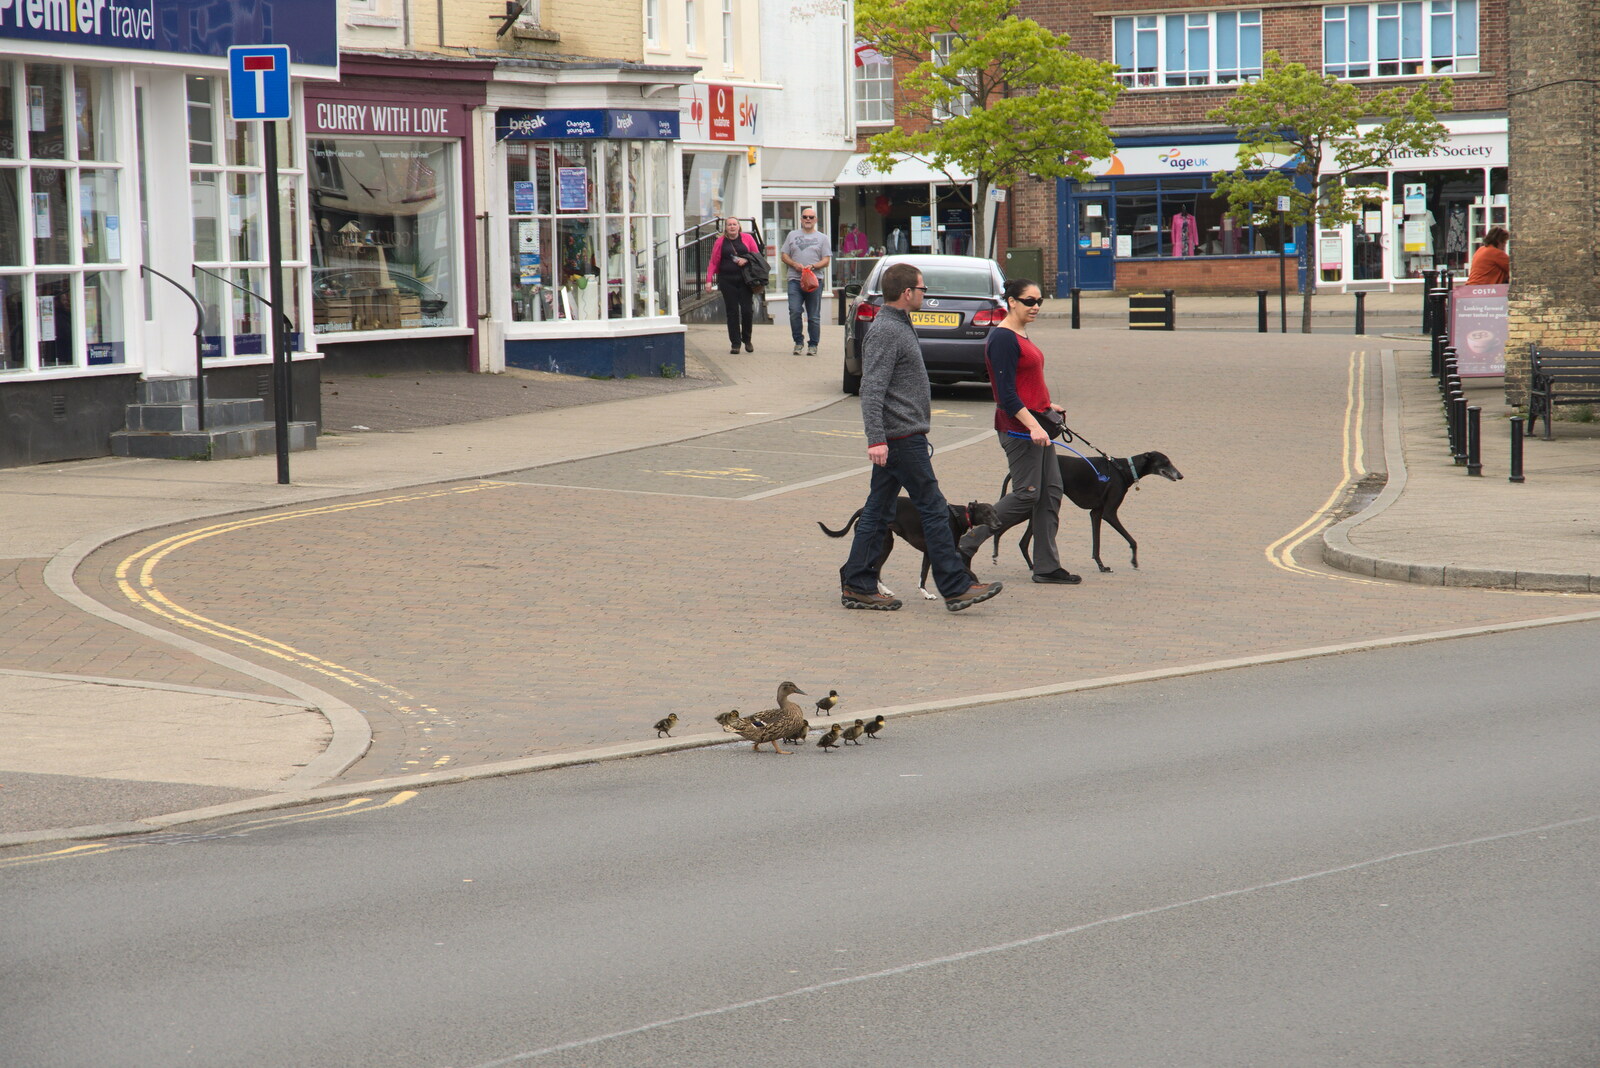 A family of ducks crosses the road from A Vaccination Afternoon, Swaffham, Norfolk - 9th May 2021